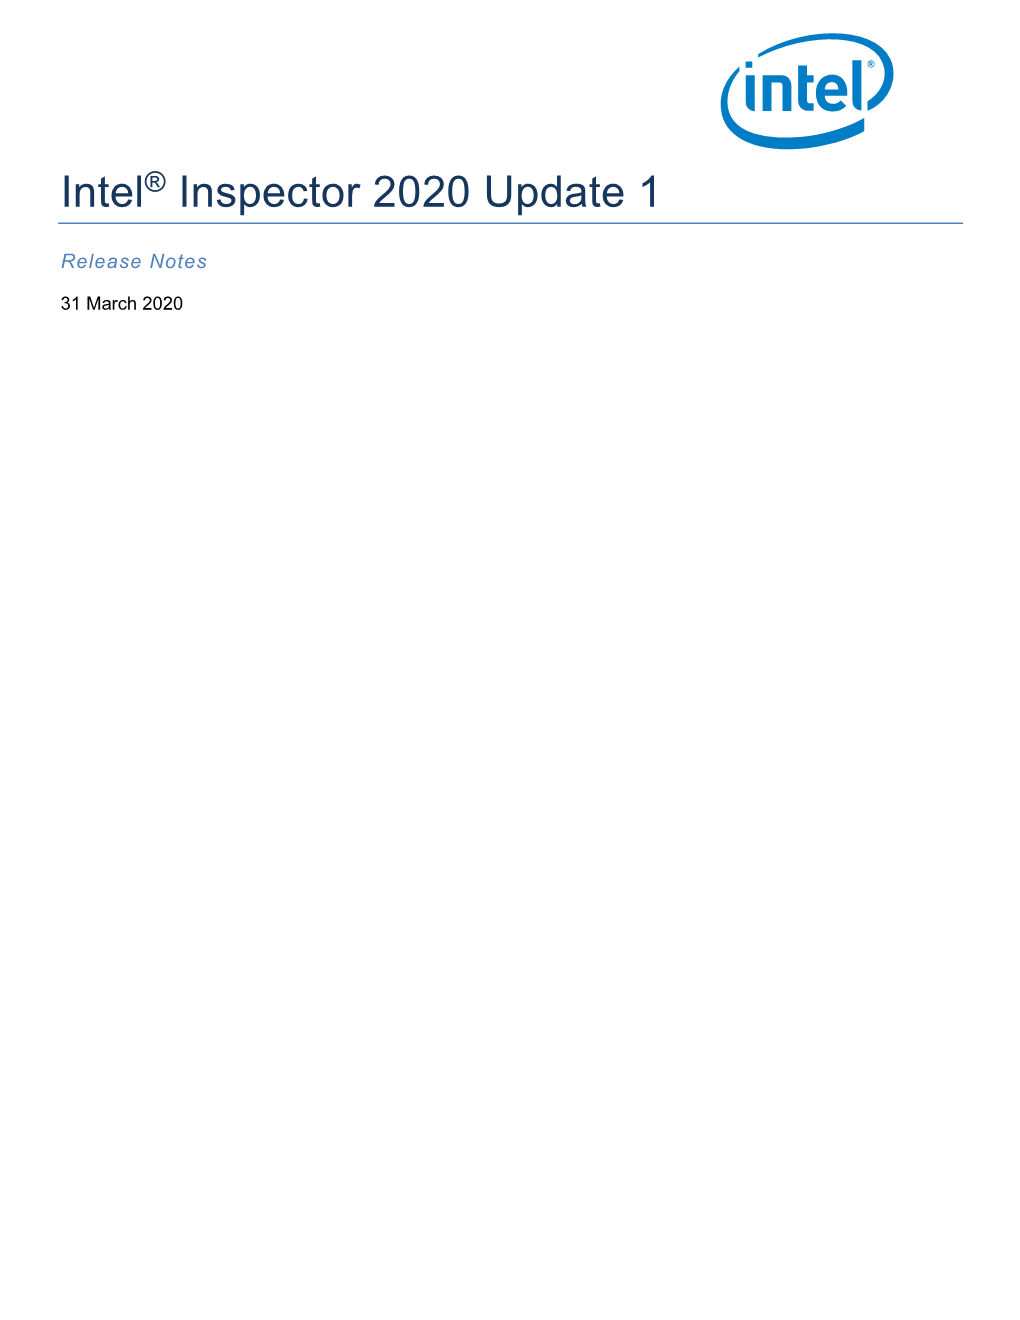 Intel® Inspector 2020 Update 1 Release Notes Intel® Inspector 2020 Update 1 to Learn More About This Product, See